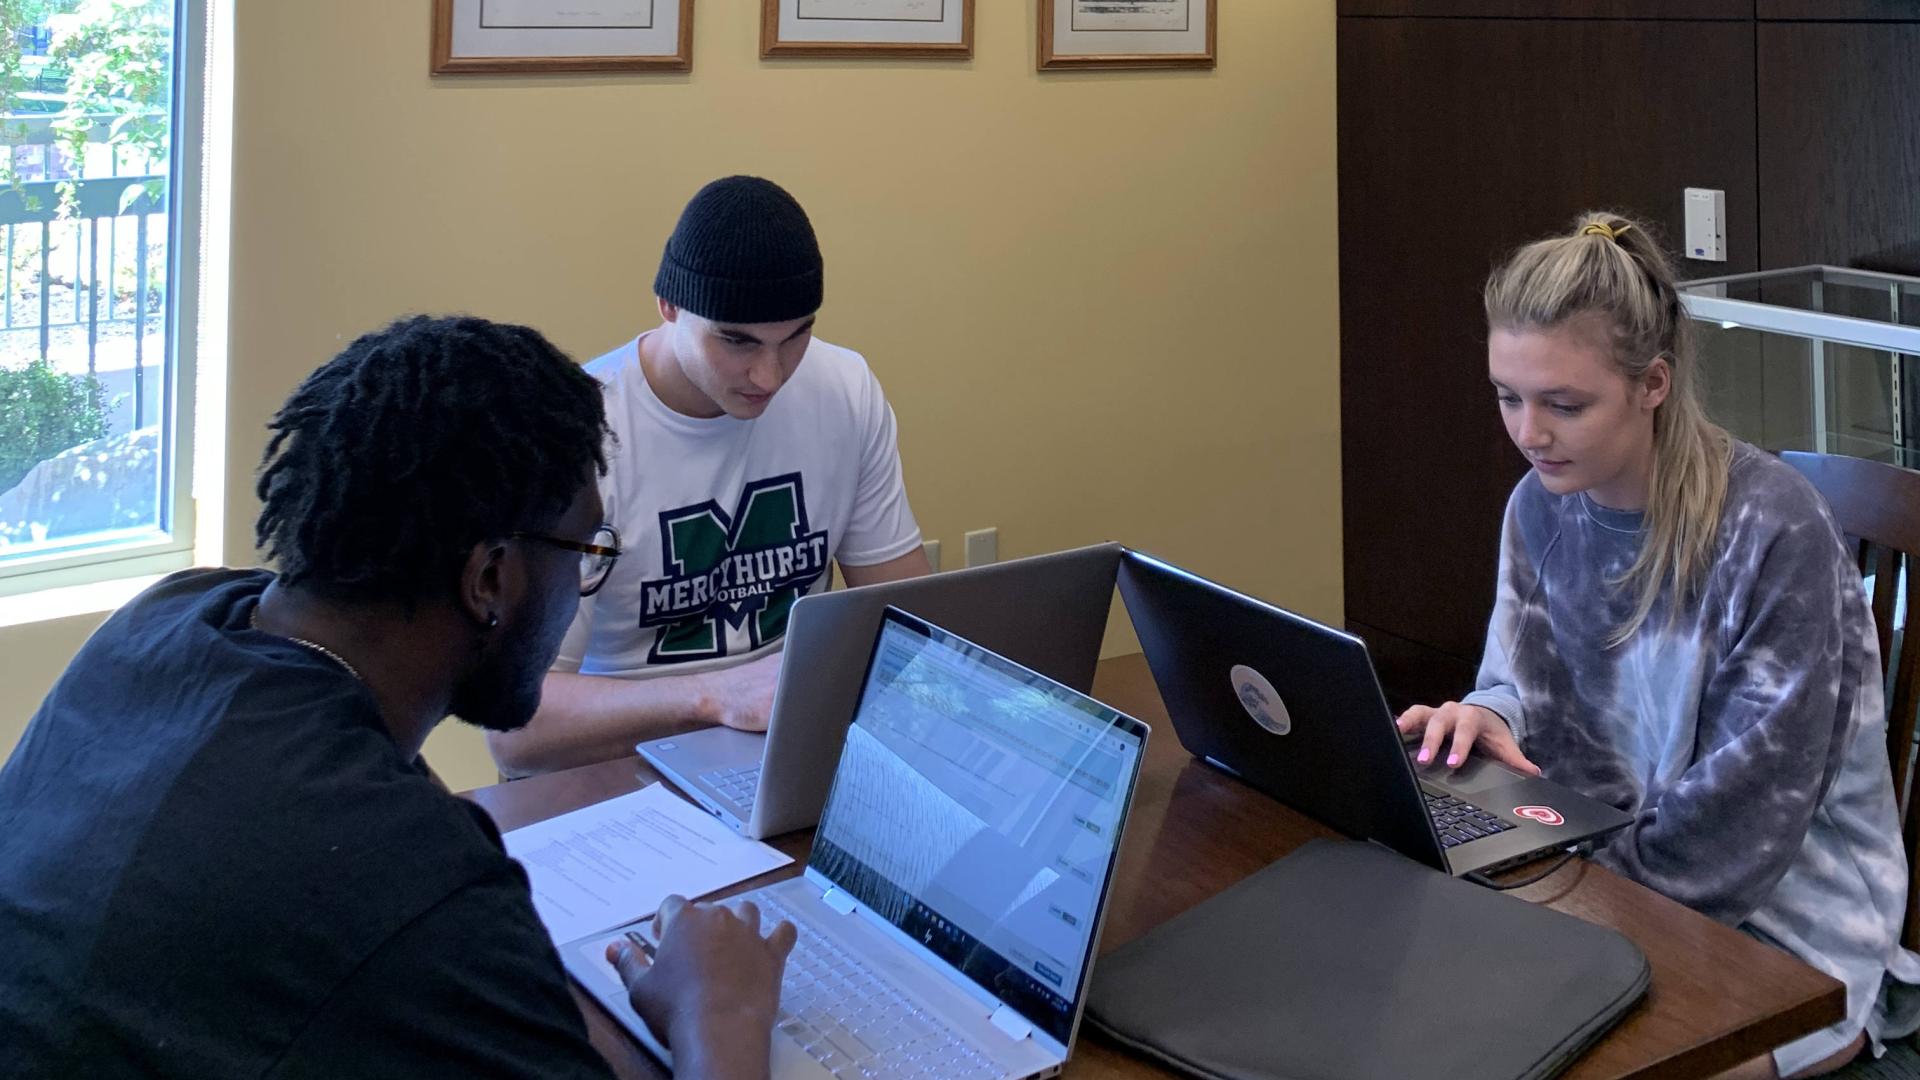 Three students working on laptops